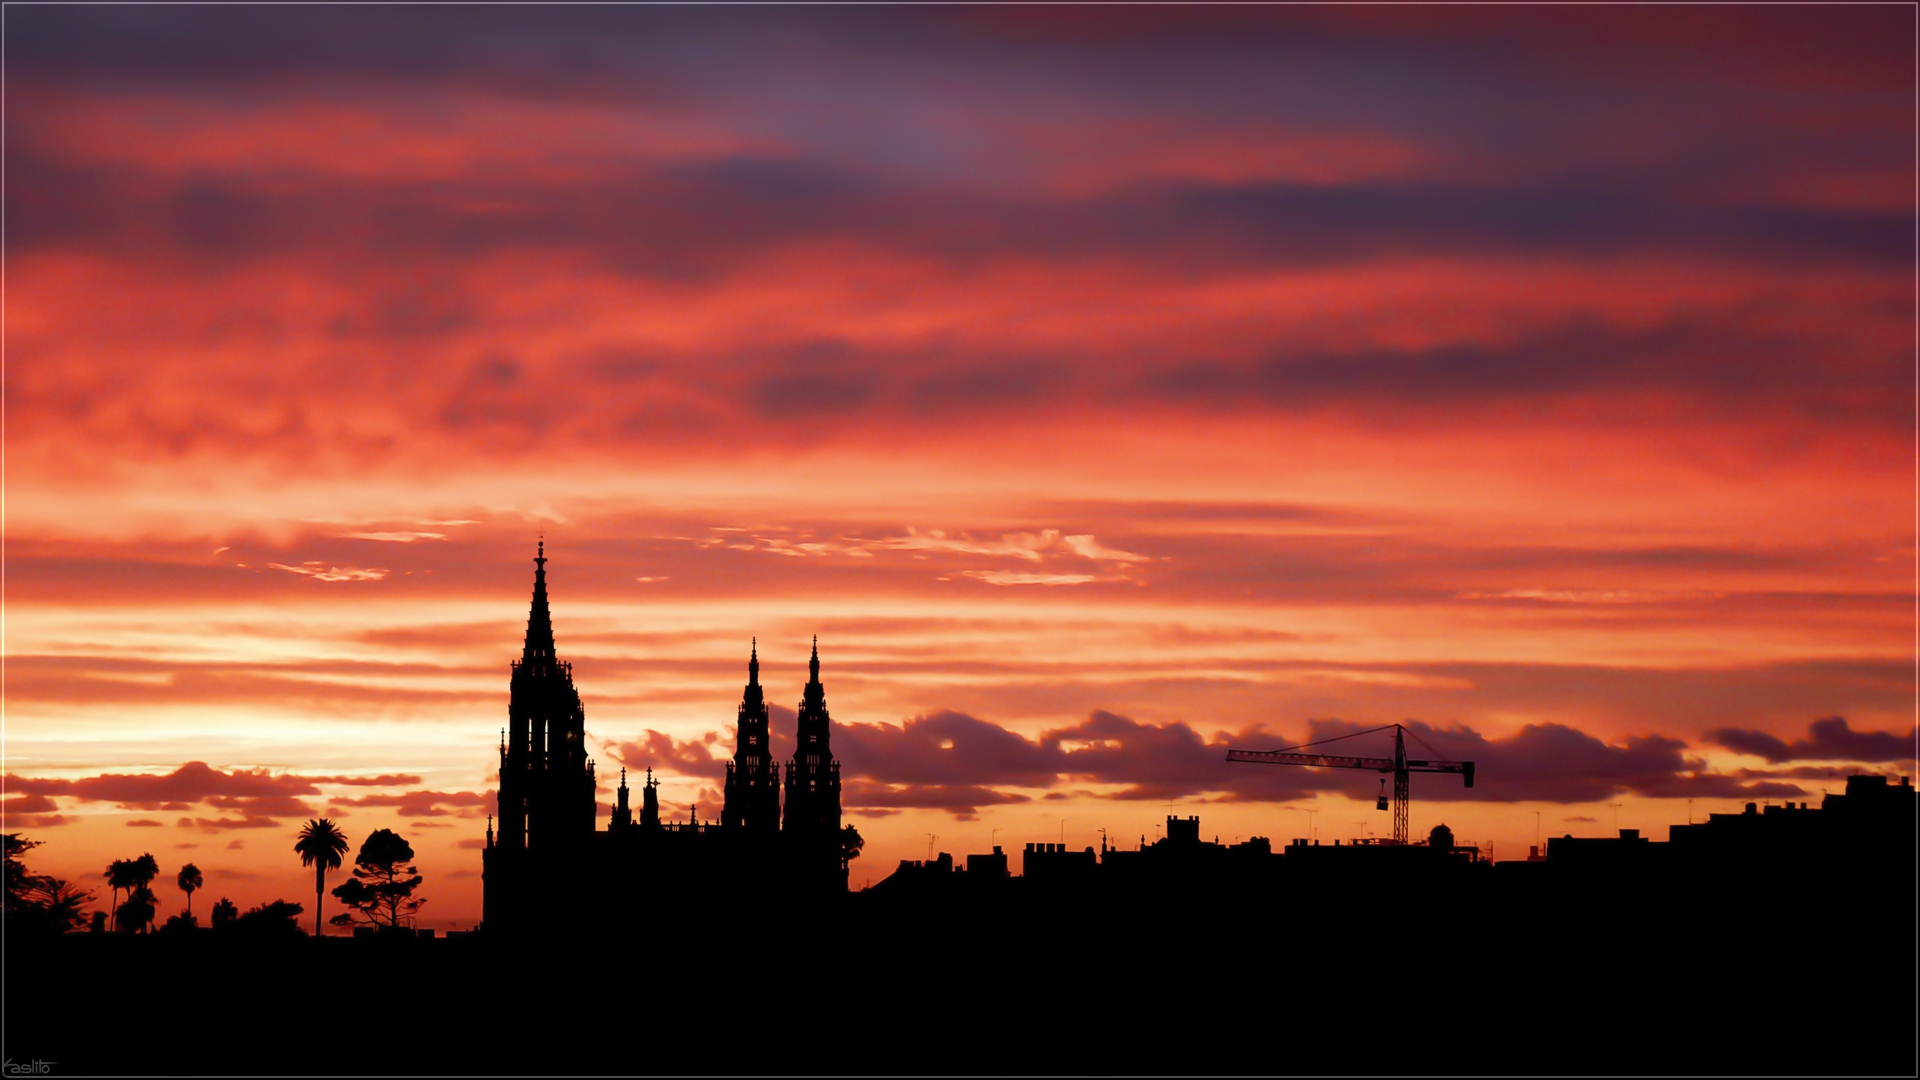 Gran Canaria Canary Islands Red Sky Sunset Silhouette Urban Church Cathedral Kaslito 1920x1080